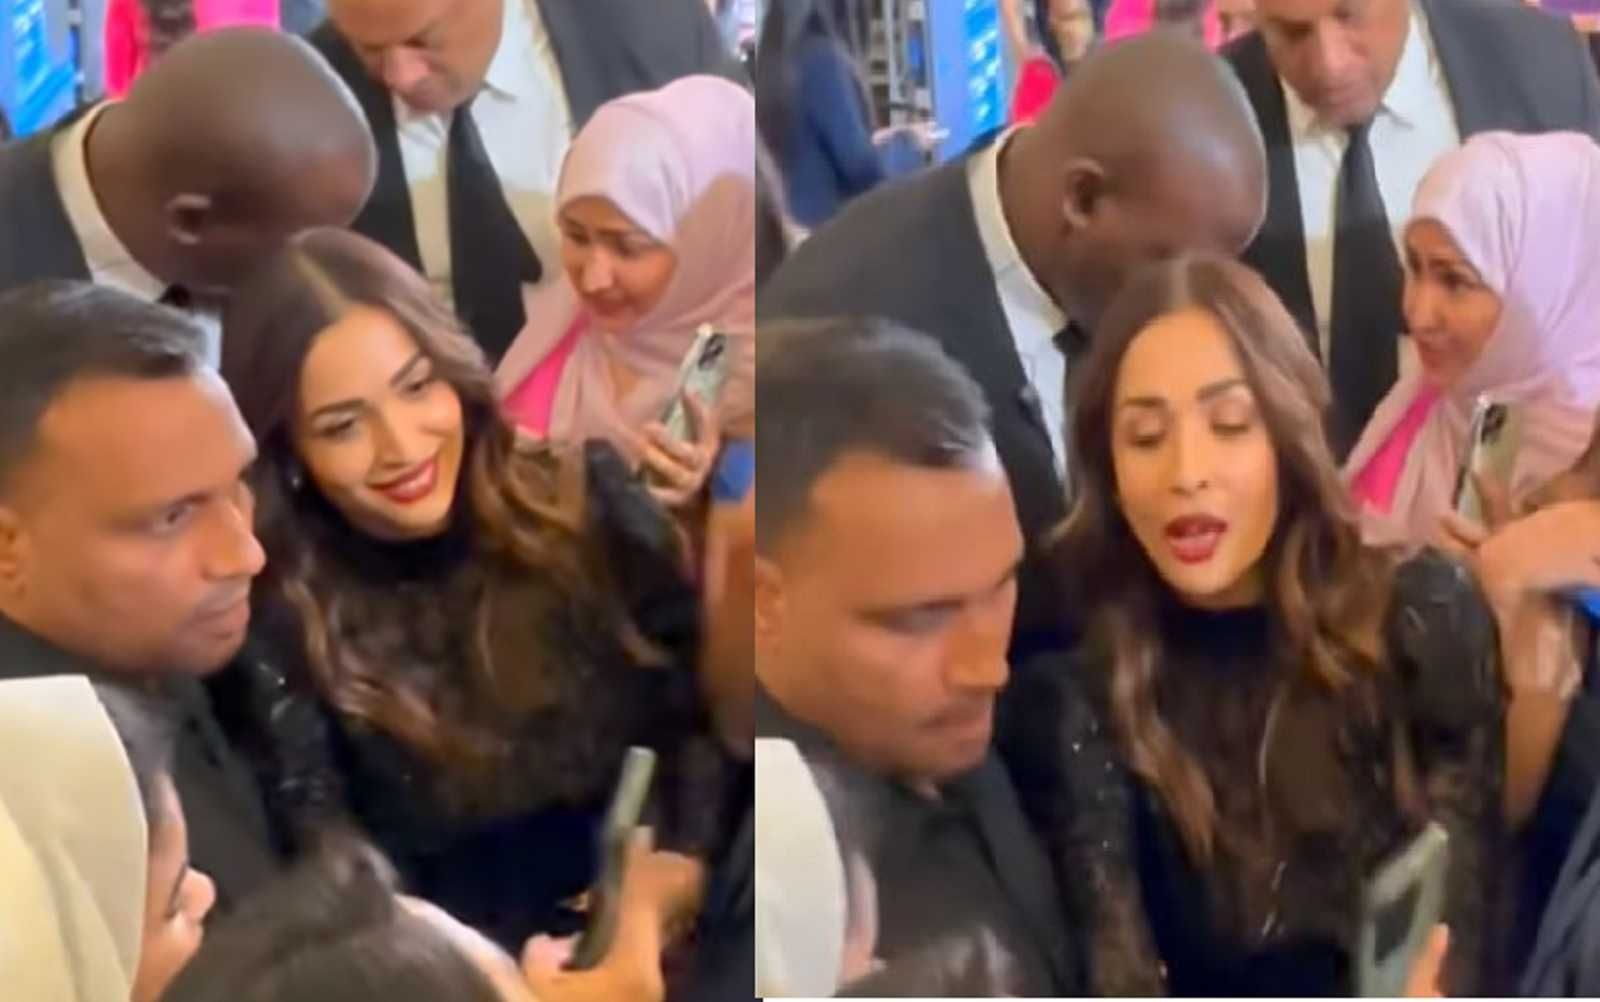 Malaika Arora gets mobbed at an event in Dubai, says 'Don't push' to fans; Watch